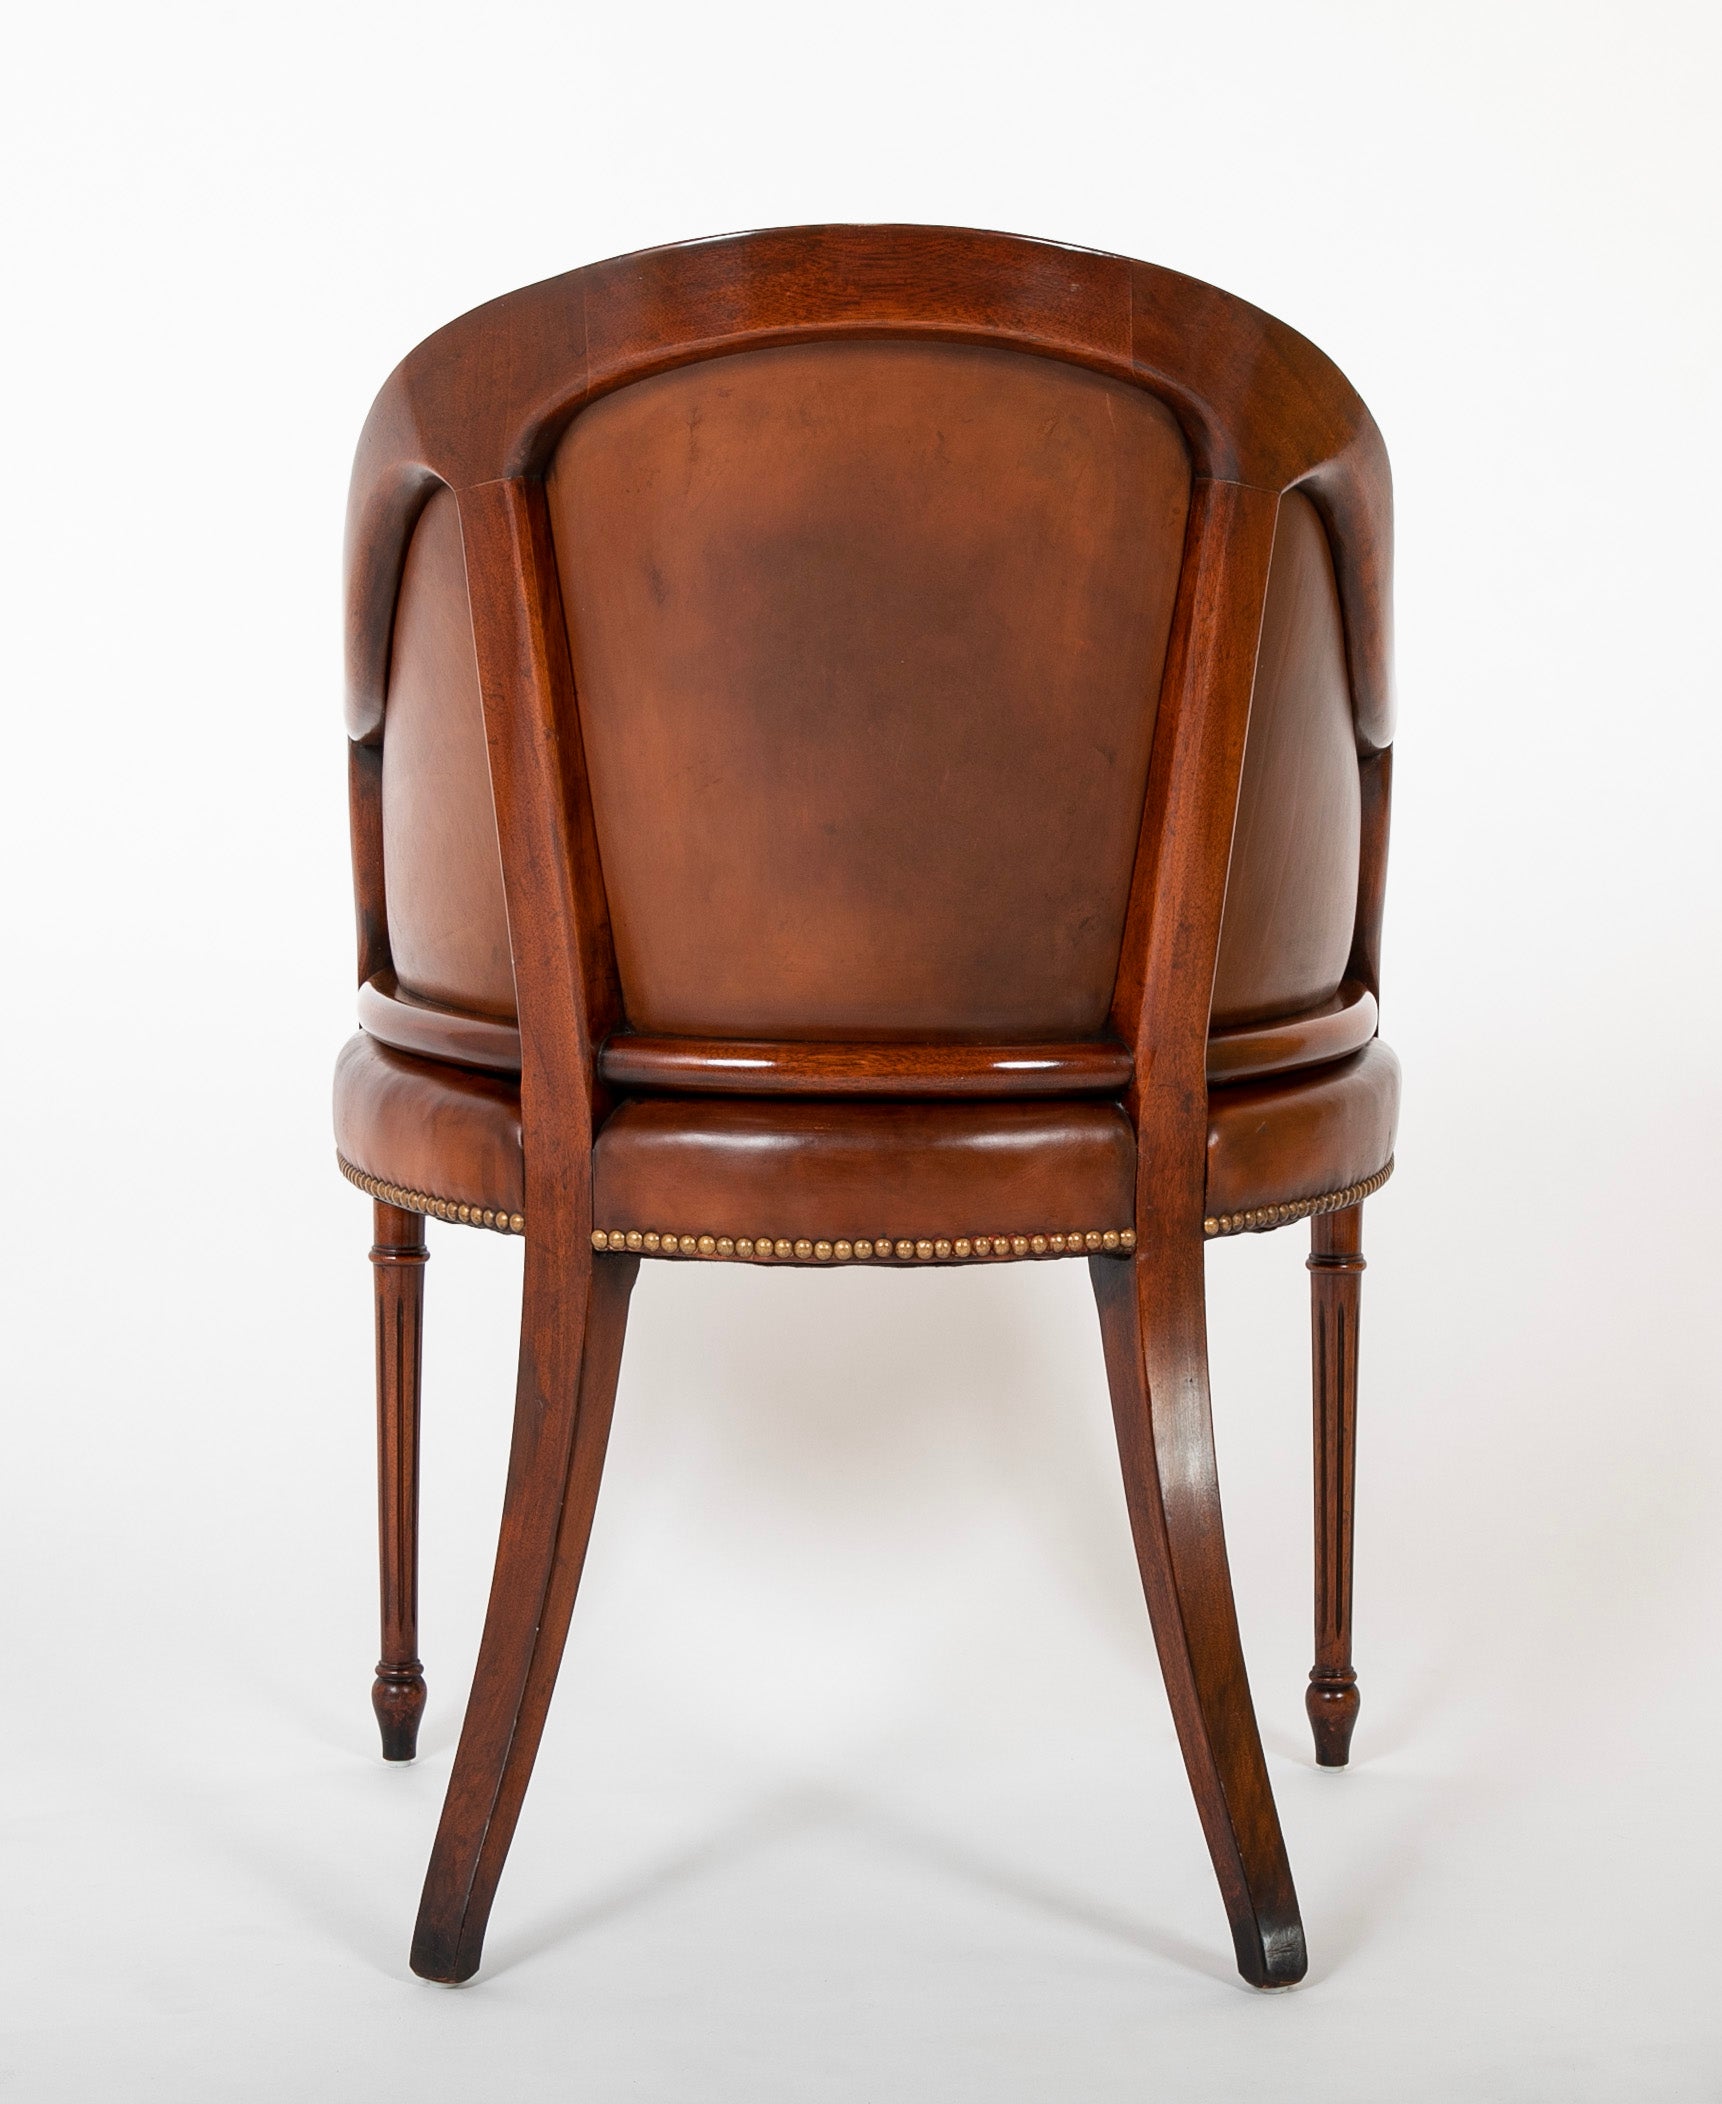 12 Mahogany and Leather Regency Style Armchairs - Available in Various Sets of 4 and 2